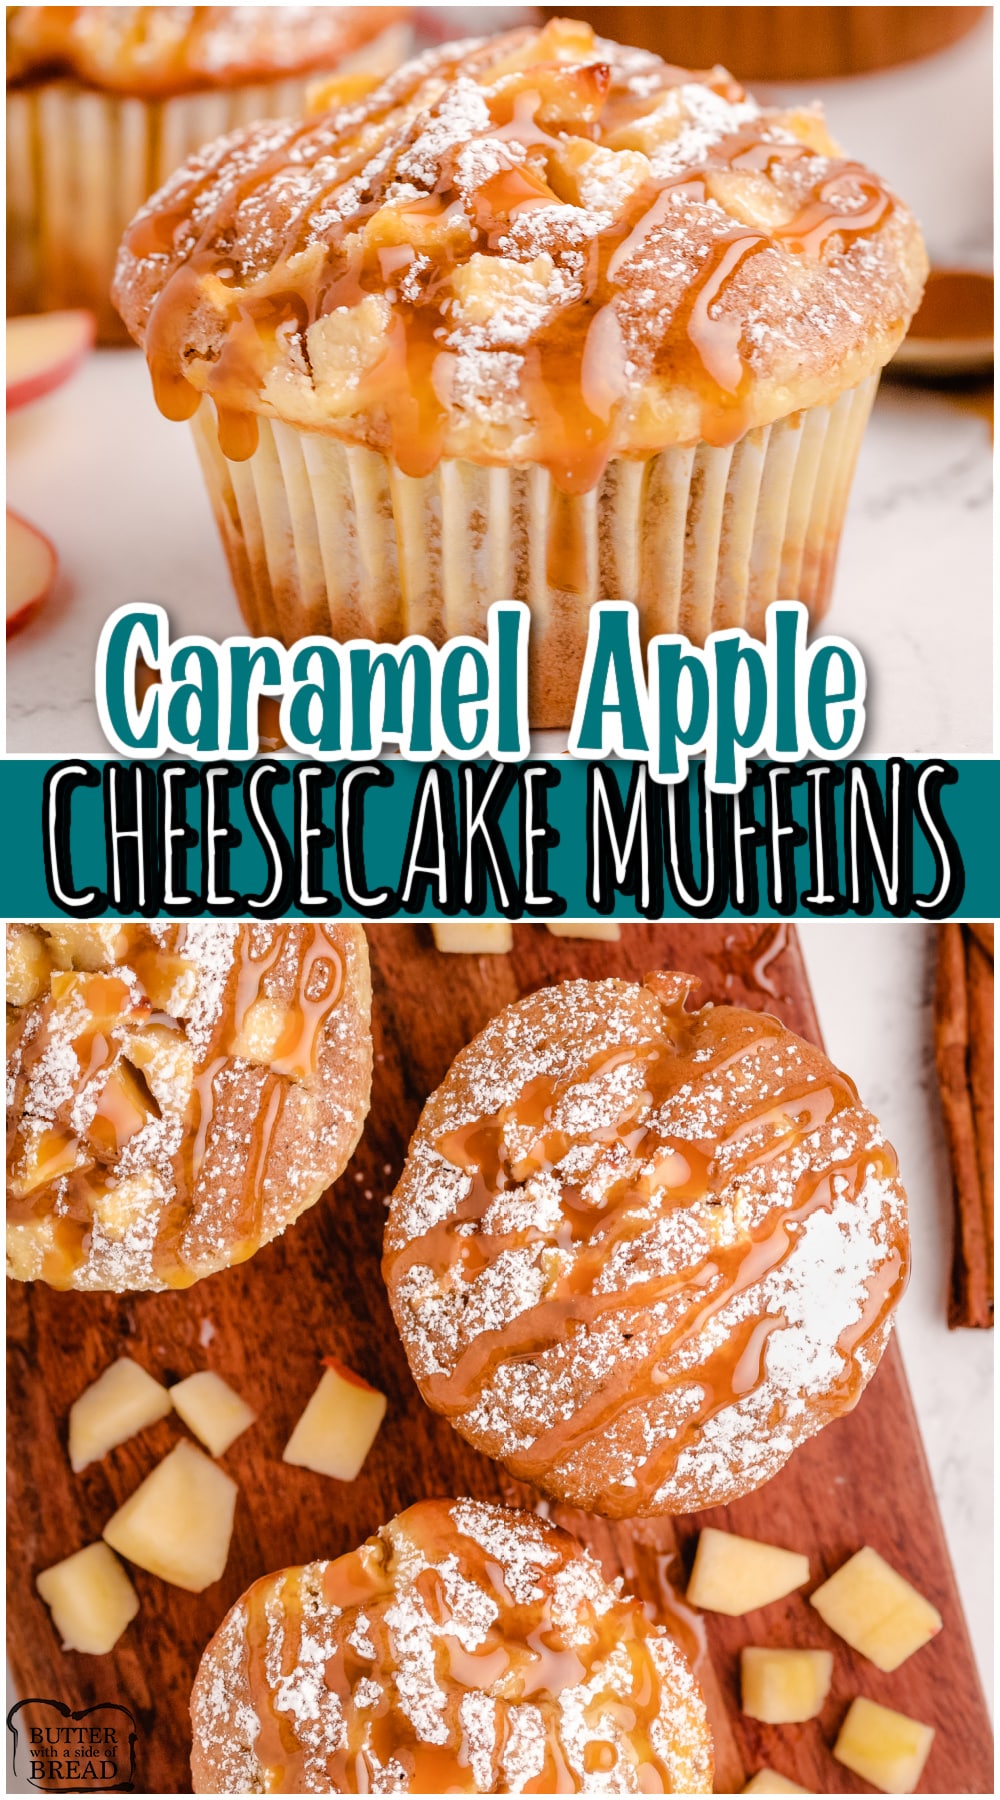 Caramel Apple Cheesecake Muffins made with spiced cake mix, filled with apples & cream cheese then topped with caramel! Decadent, bakery-style muffins made easy!